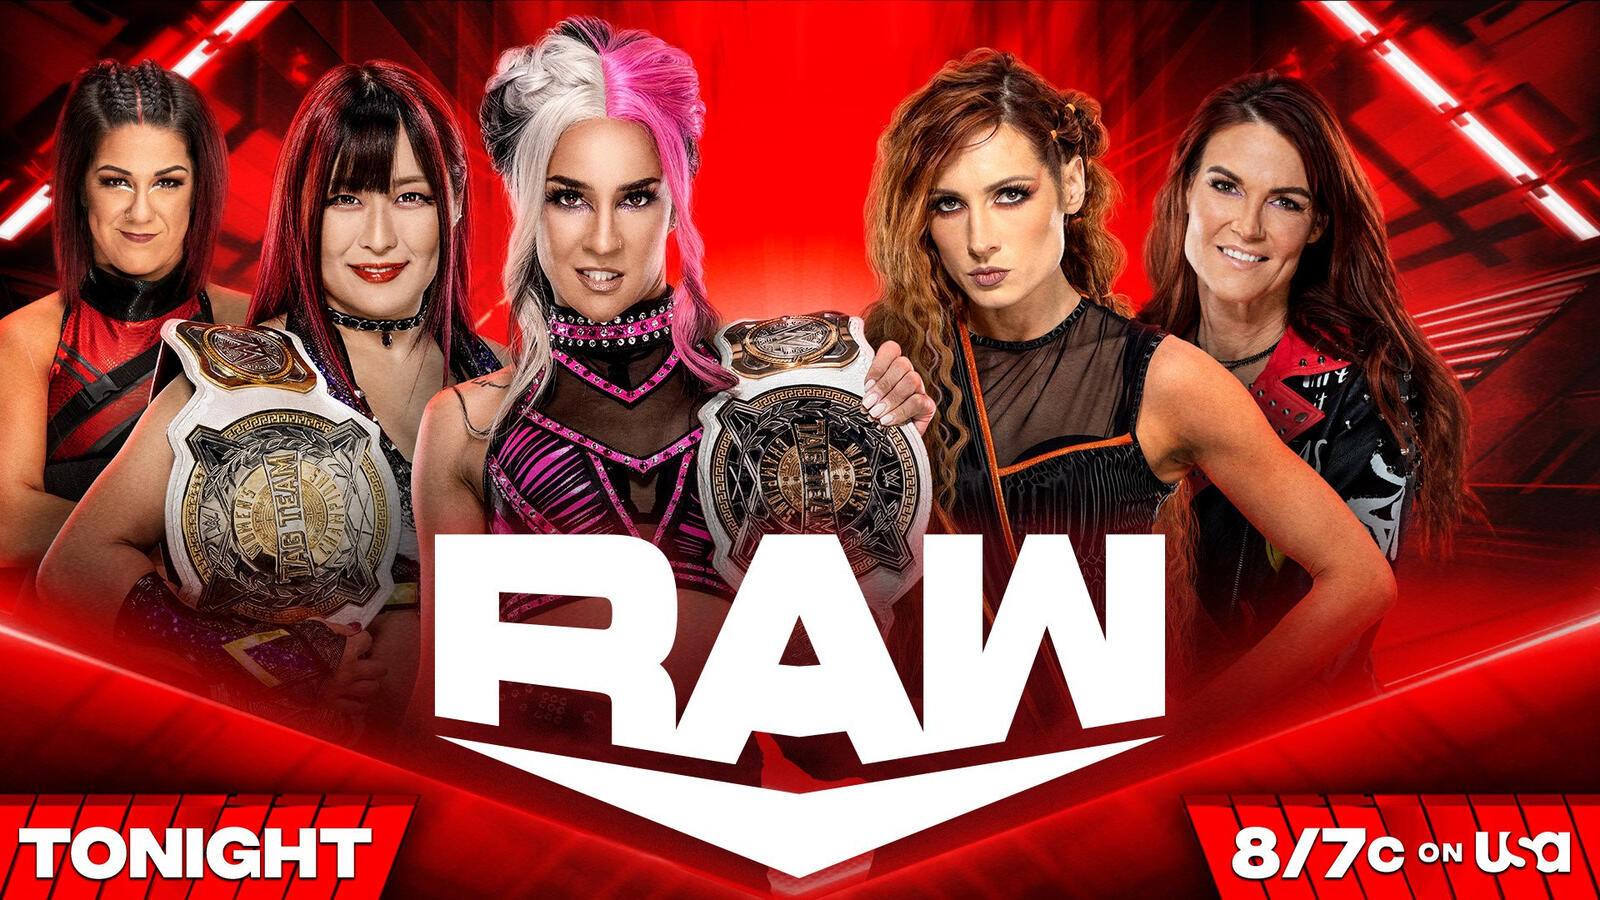 2/27 WWE RAW Preview - Becky Lynch And Lita Vie For WWE Women’s Tag Team Gold